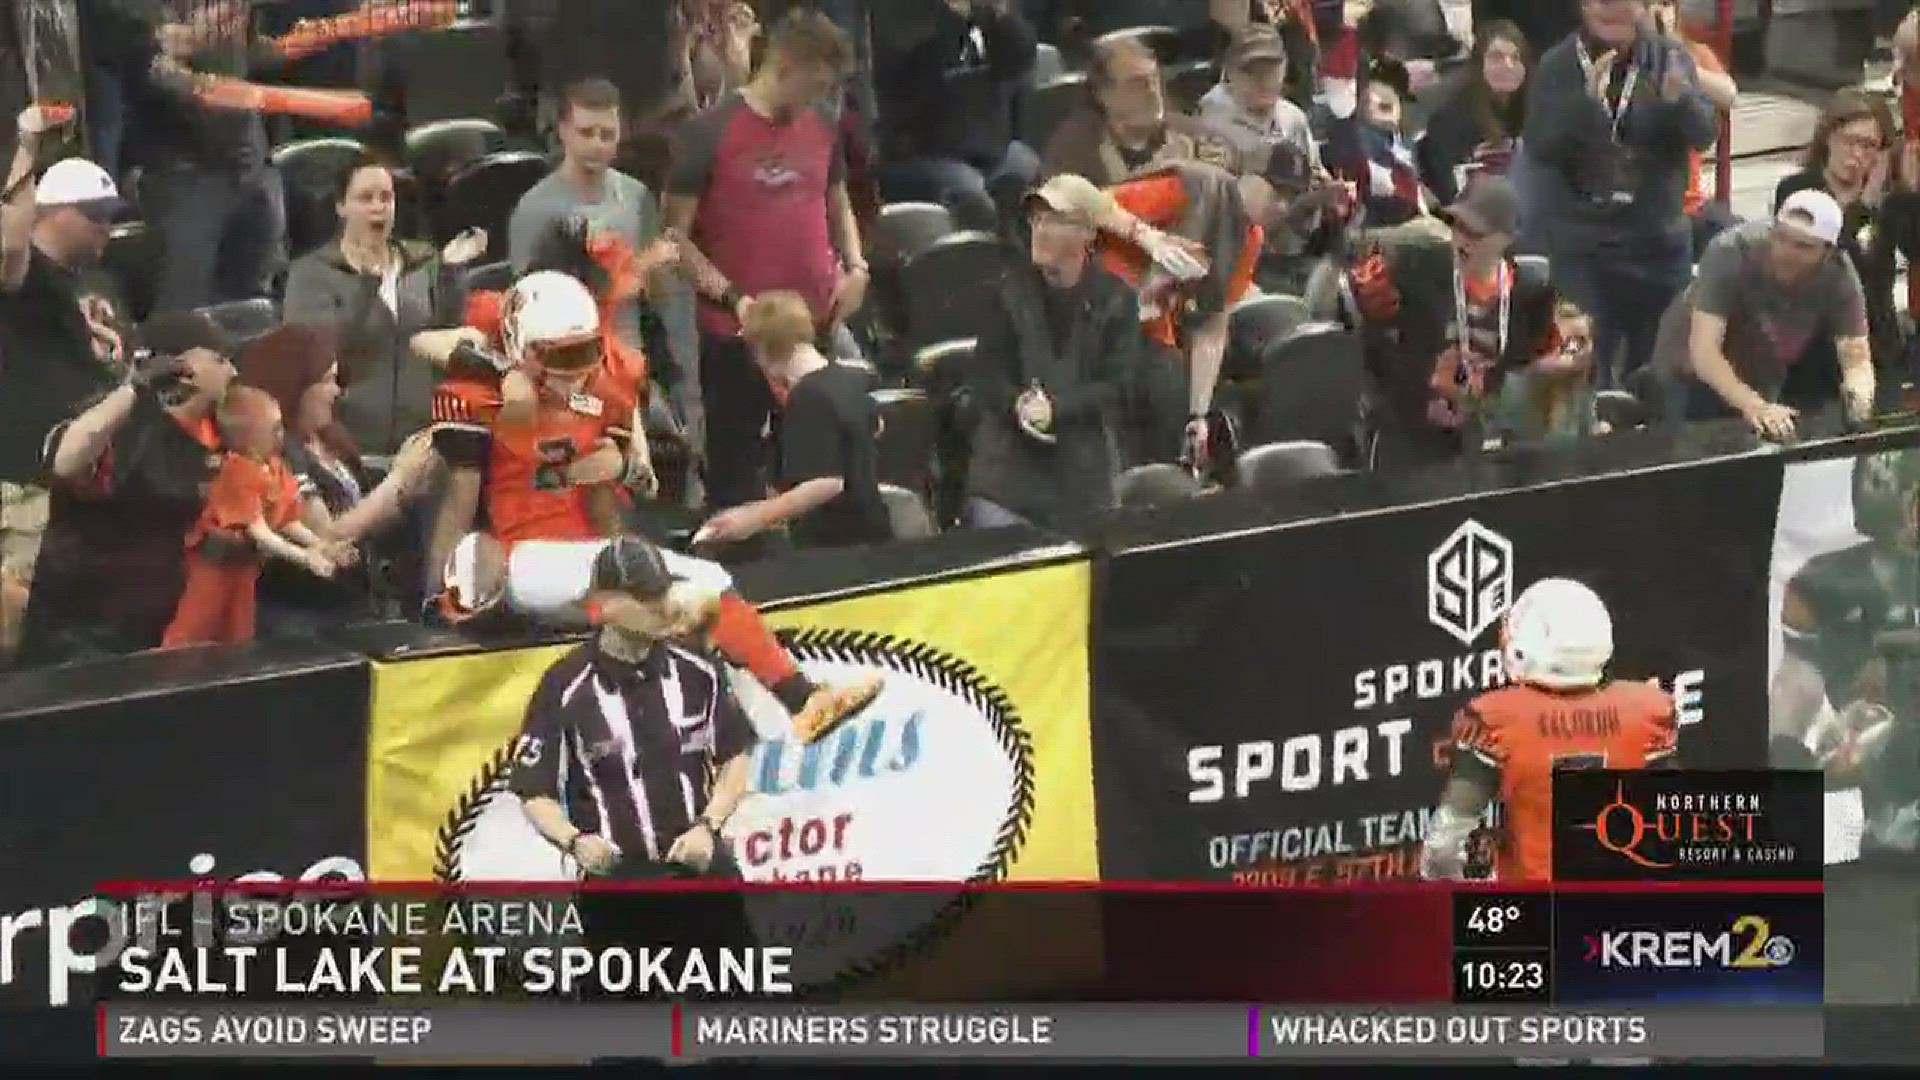 It wasn't pretty, but a win is a win. The Spokane Empire edge Salt Lake 31-29 at home, Sunday.